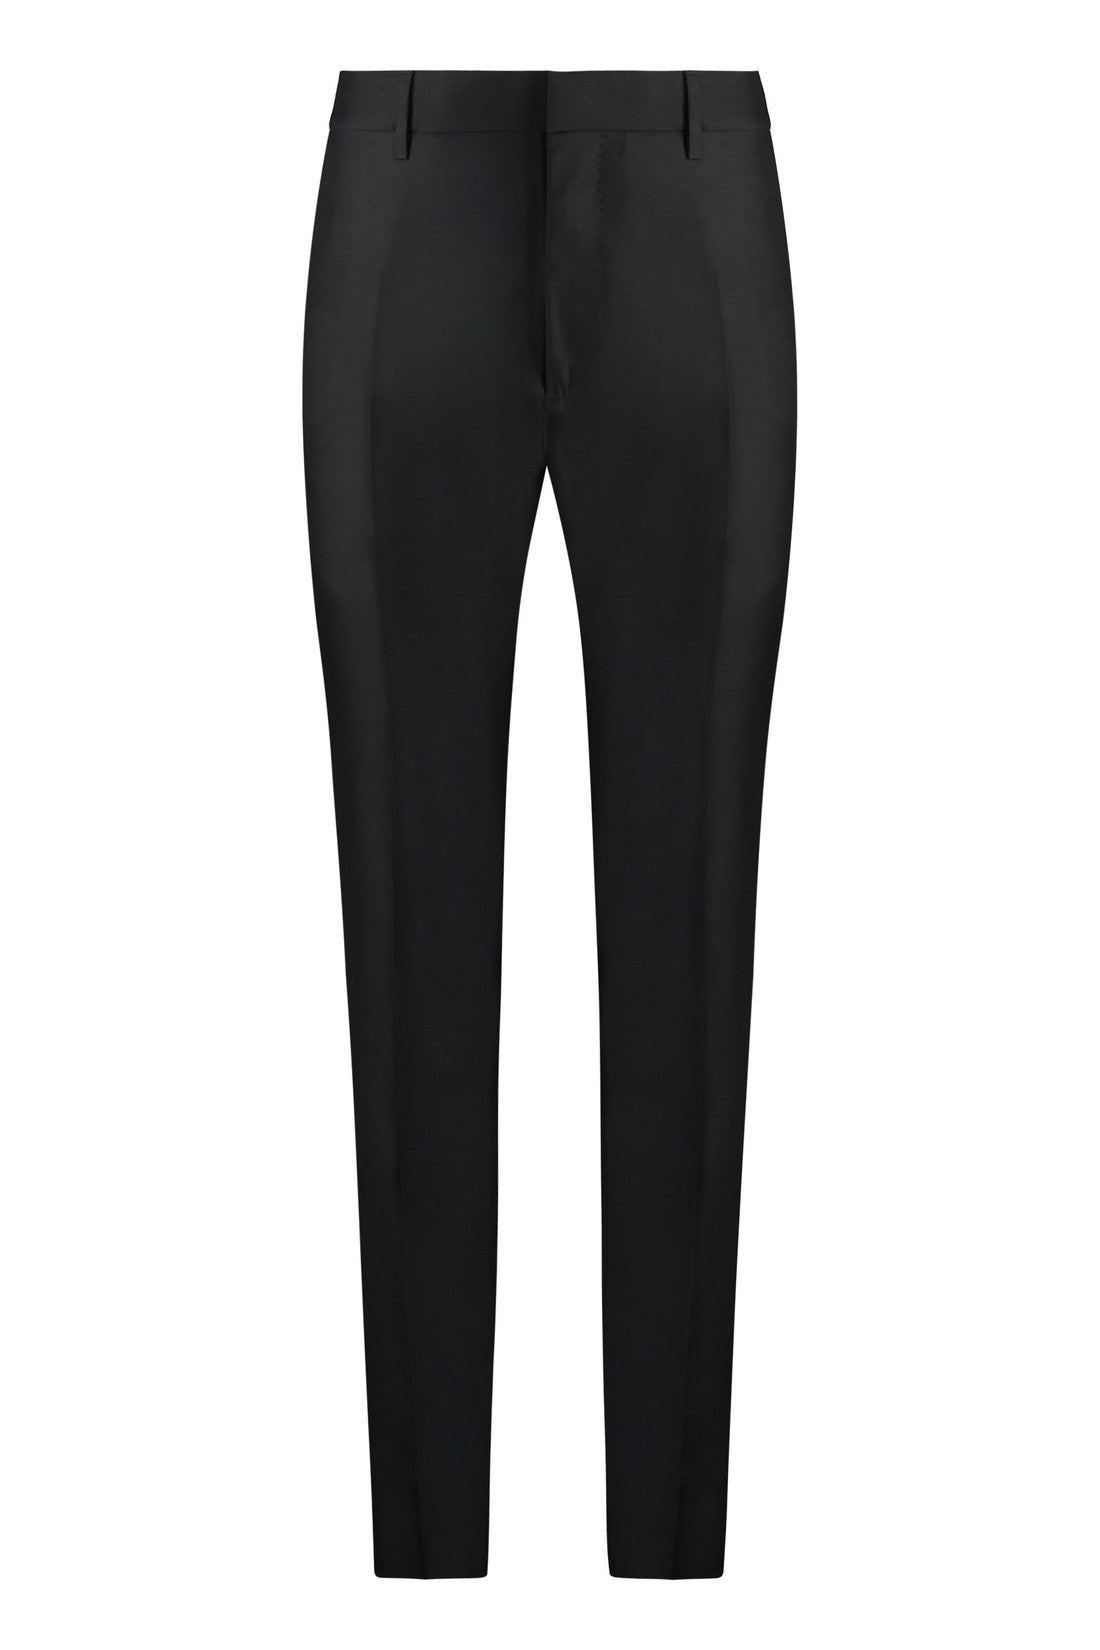 Dsquared2-OUTLET-SALE-Wool-blend taylored cigarette trousers-ARCHIVIST